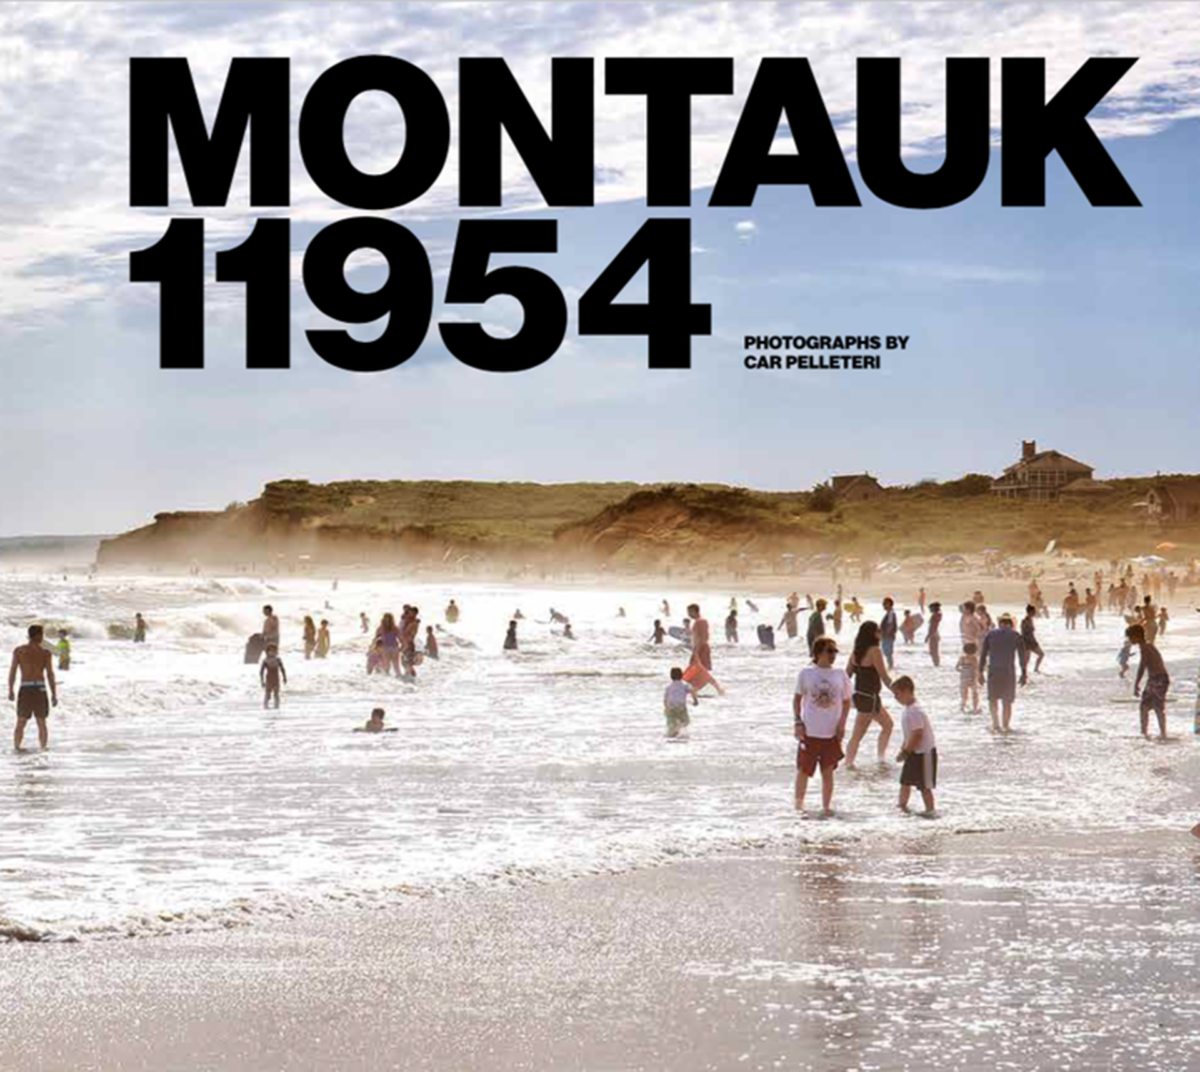 Book-Review-montauk11954cover